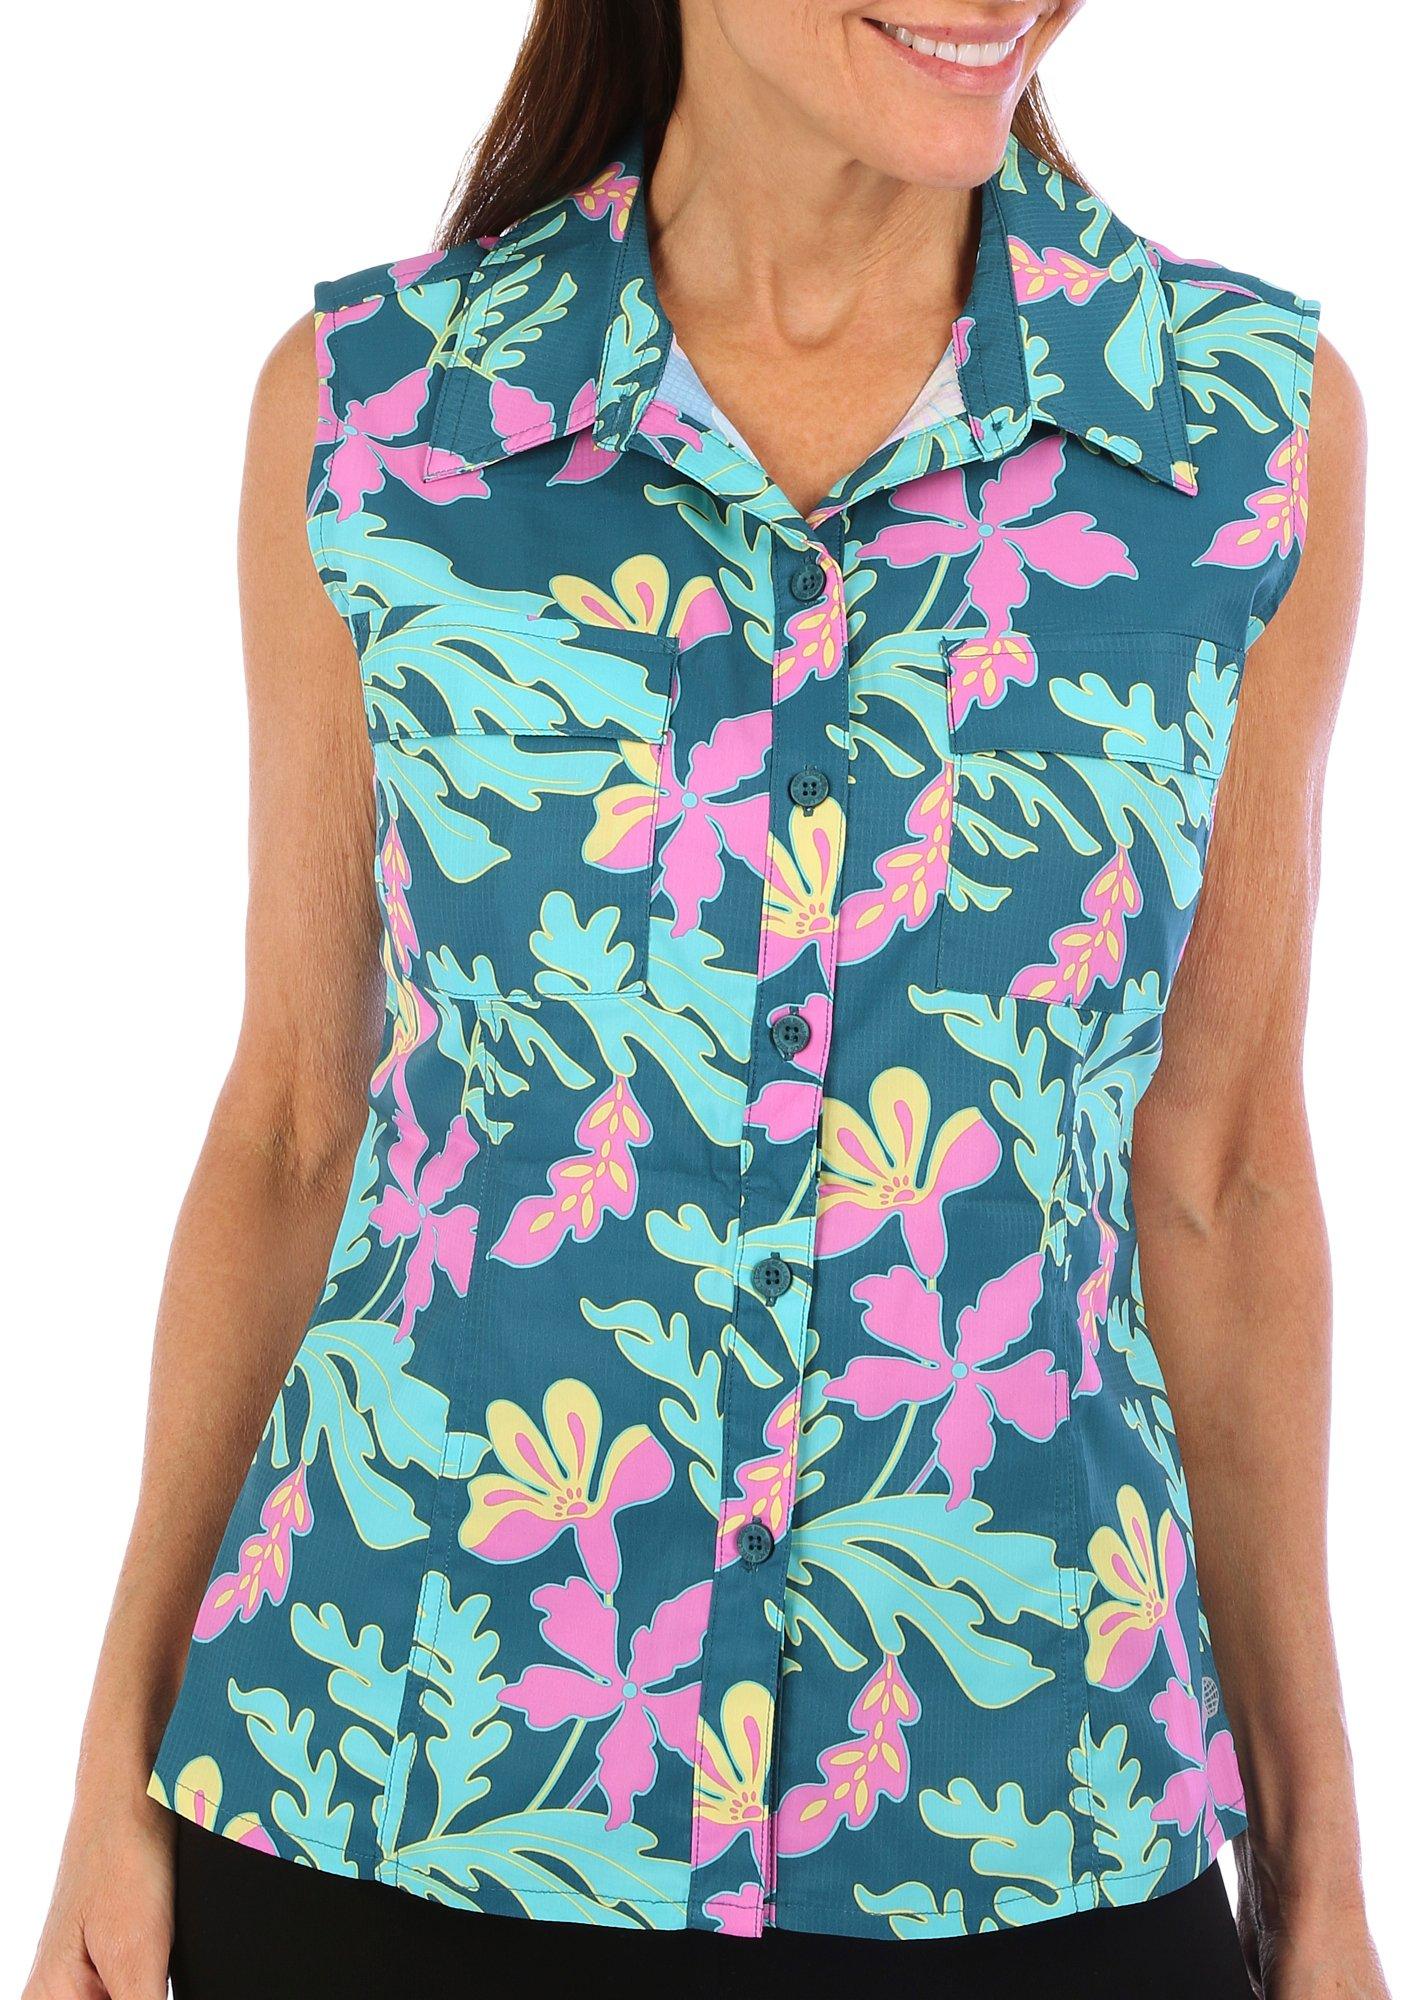 Reel Legends Womens KEEP IT COOL active floral fishing tank top, size XS